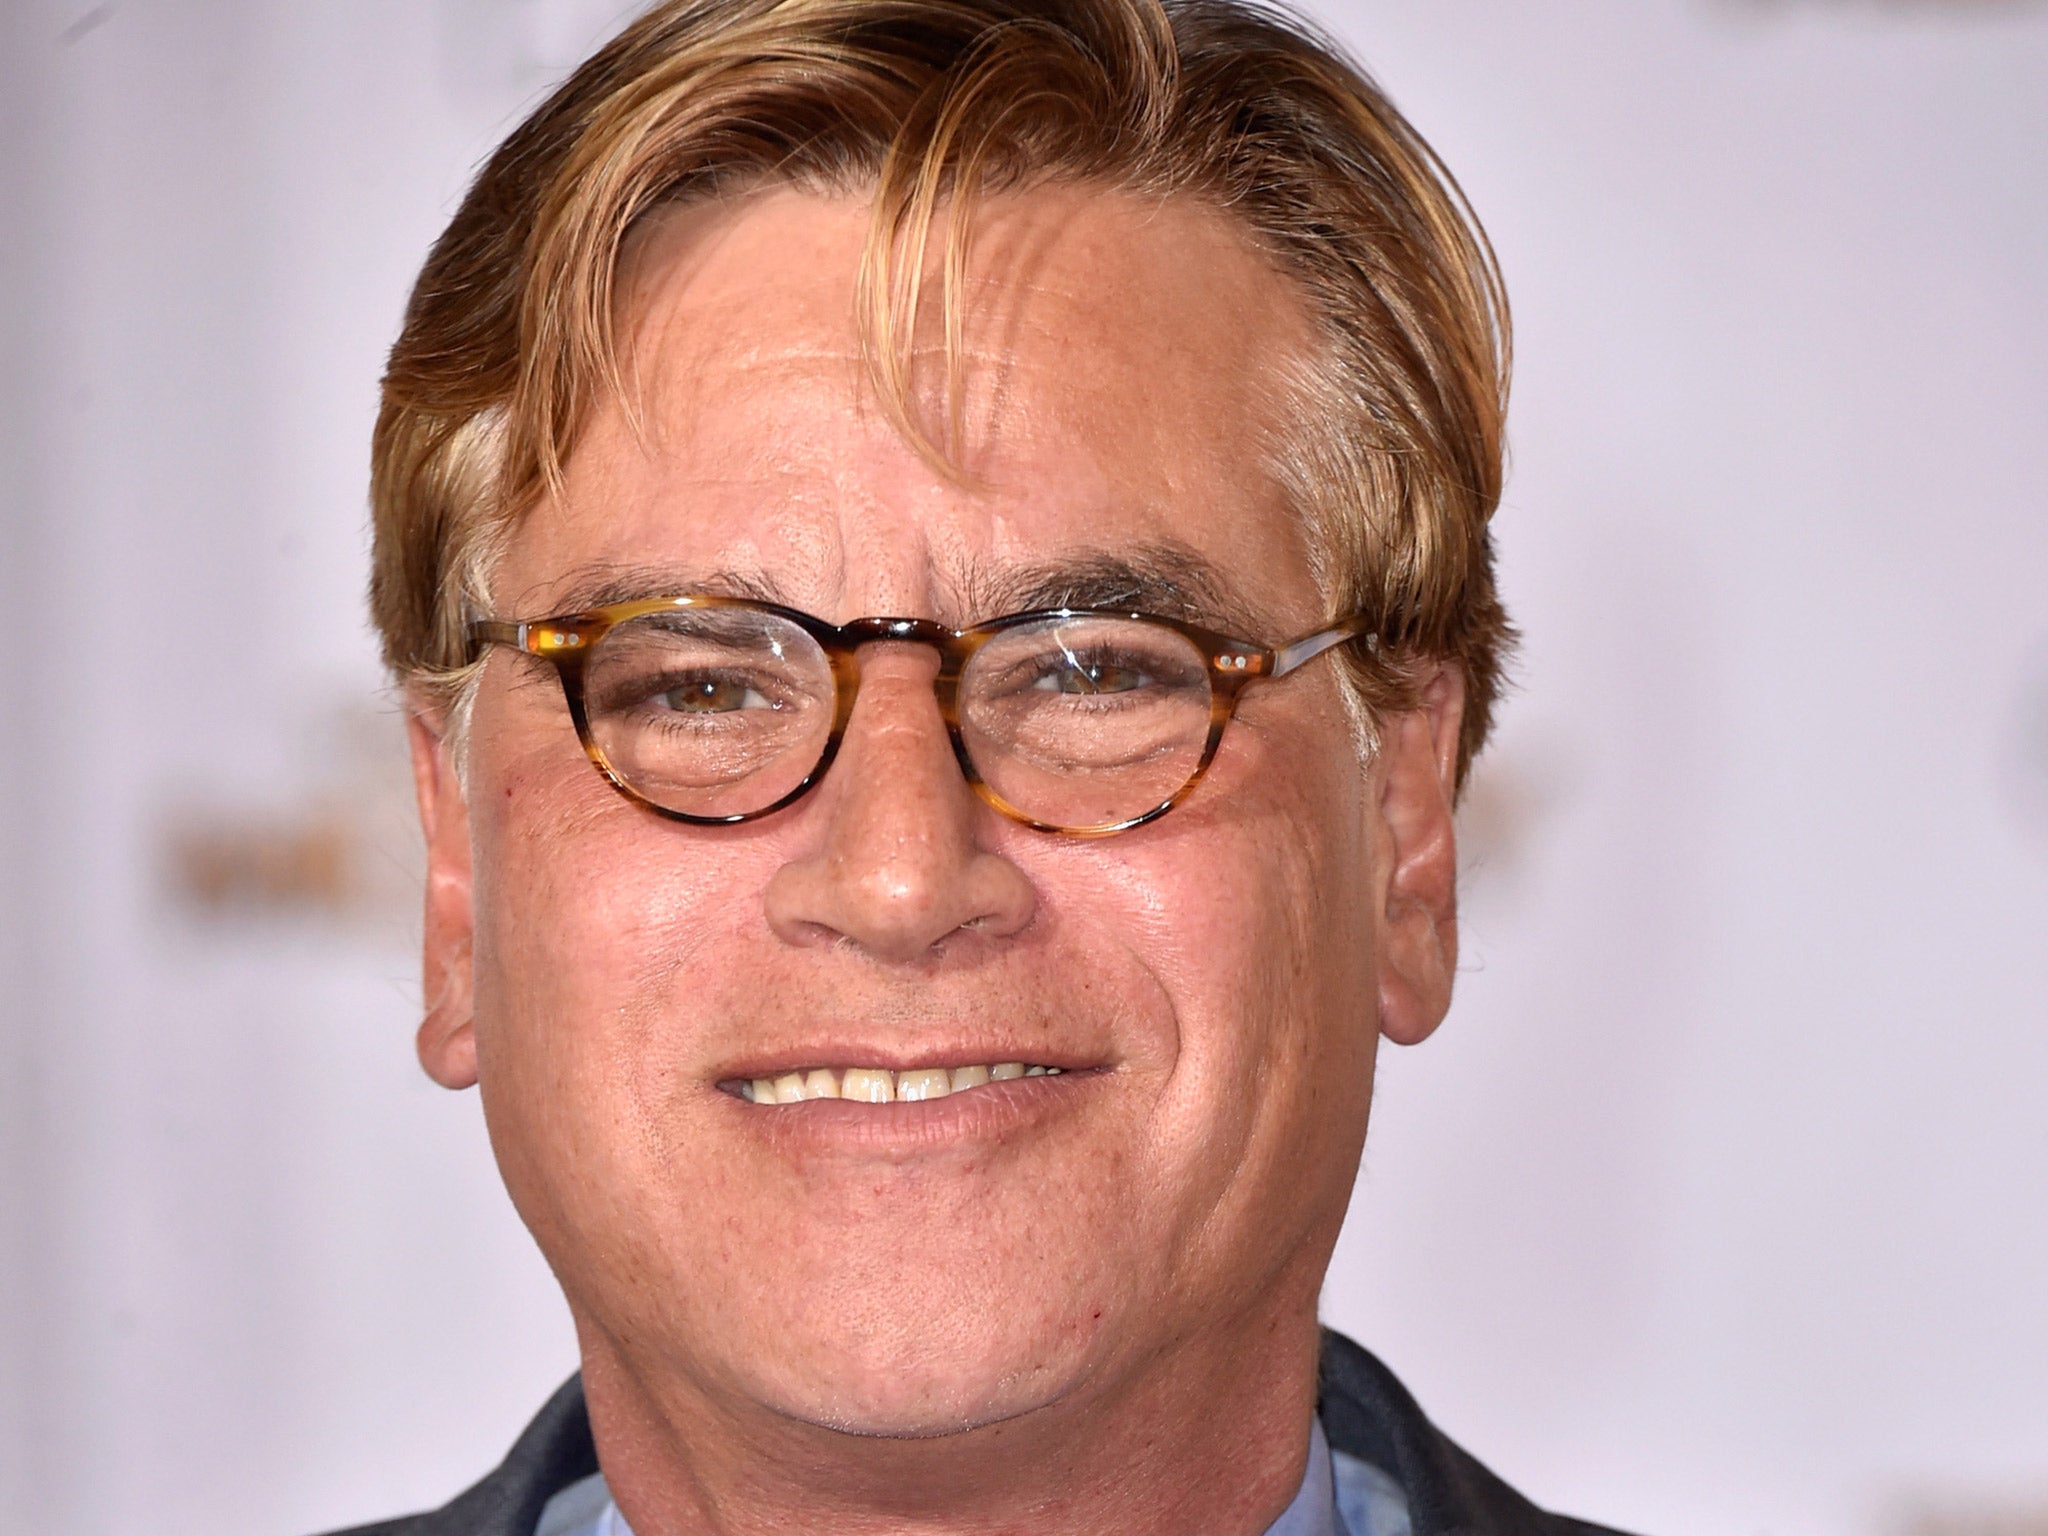 'Newsroom' creator Aaron Sorkin said that Alena Smith was 'excused from the room' for failing to 'move on' from her objections to the storyline